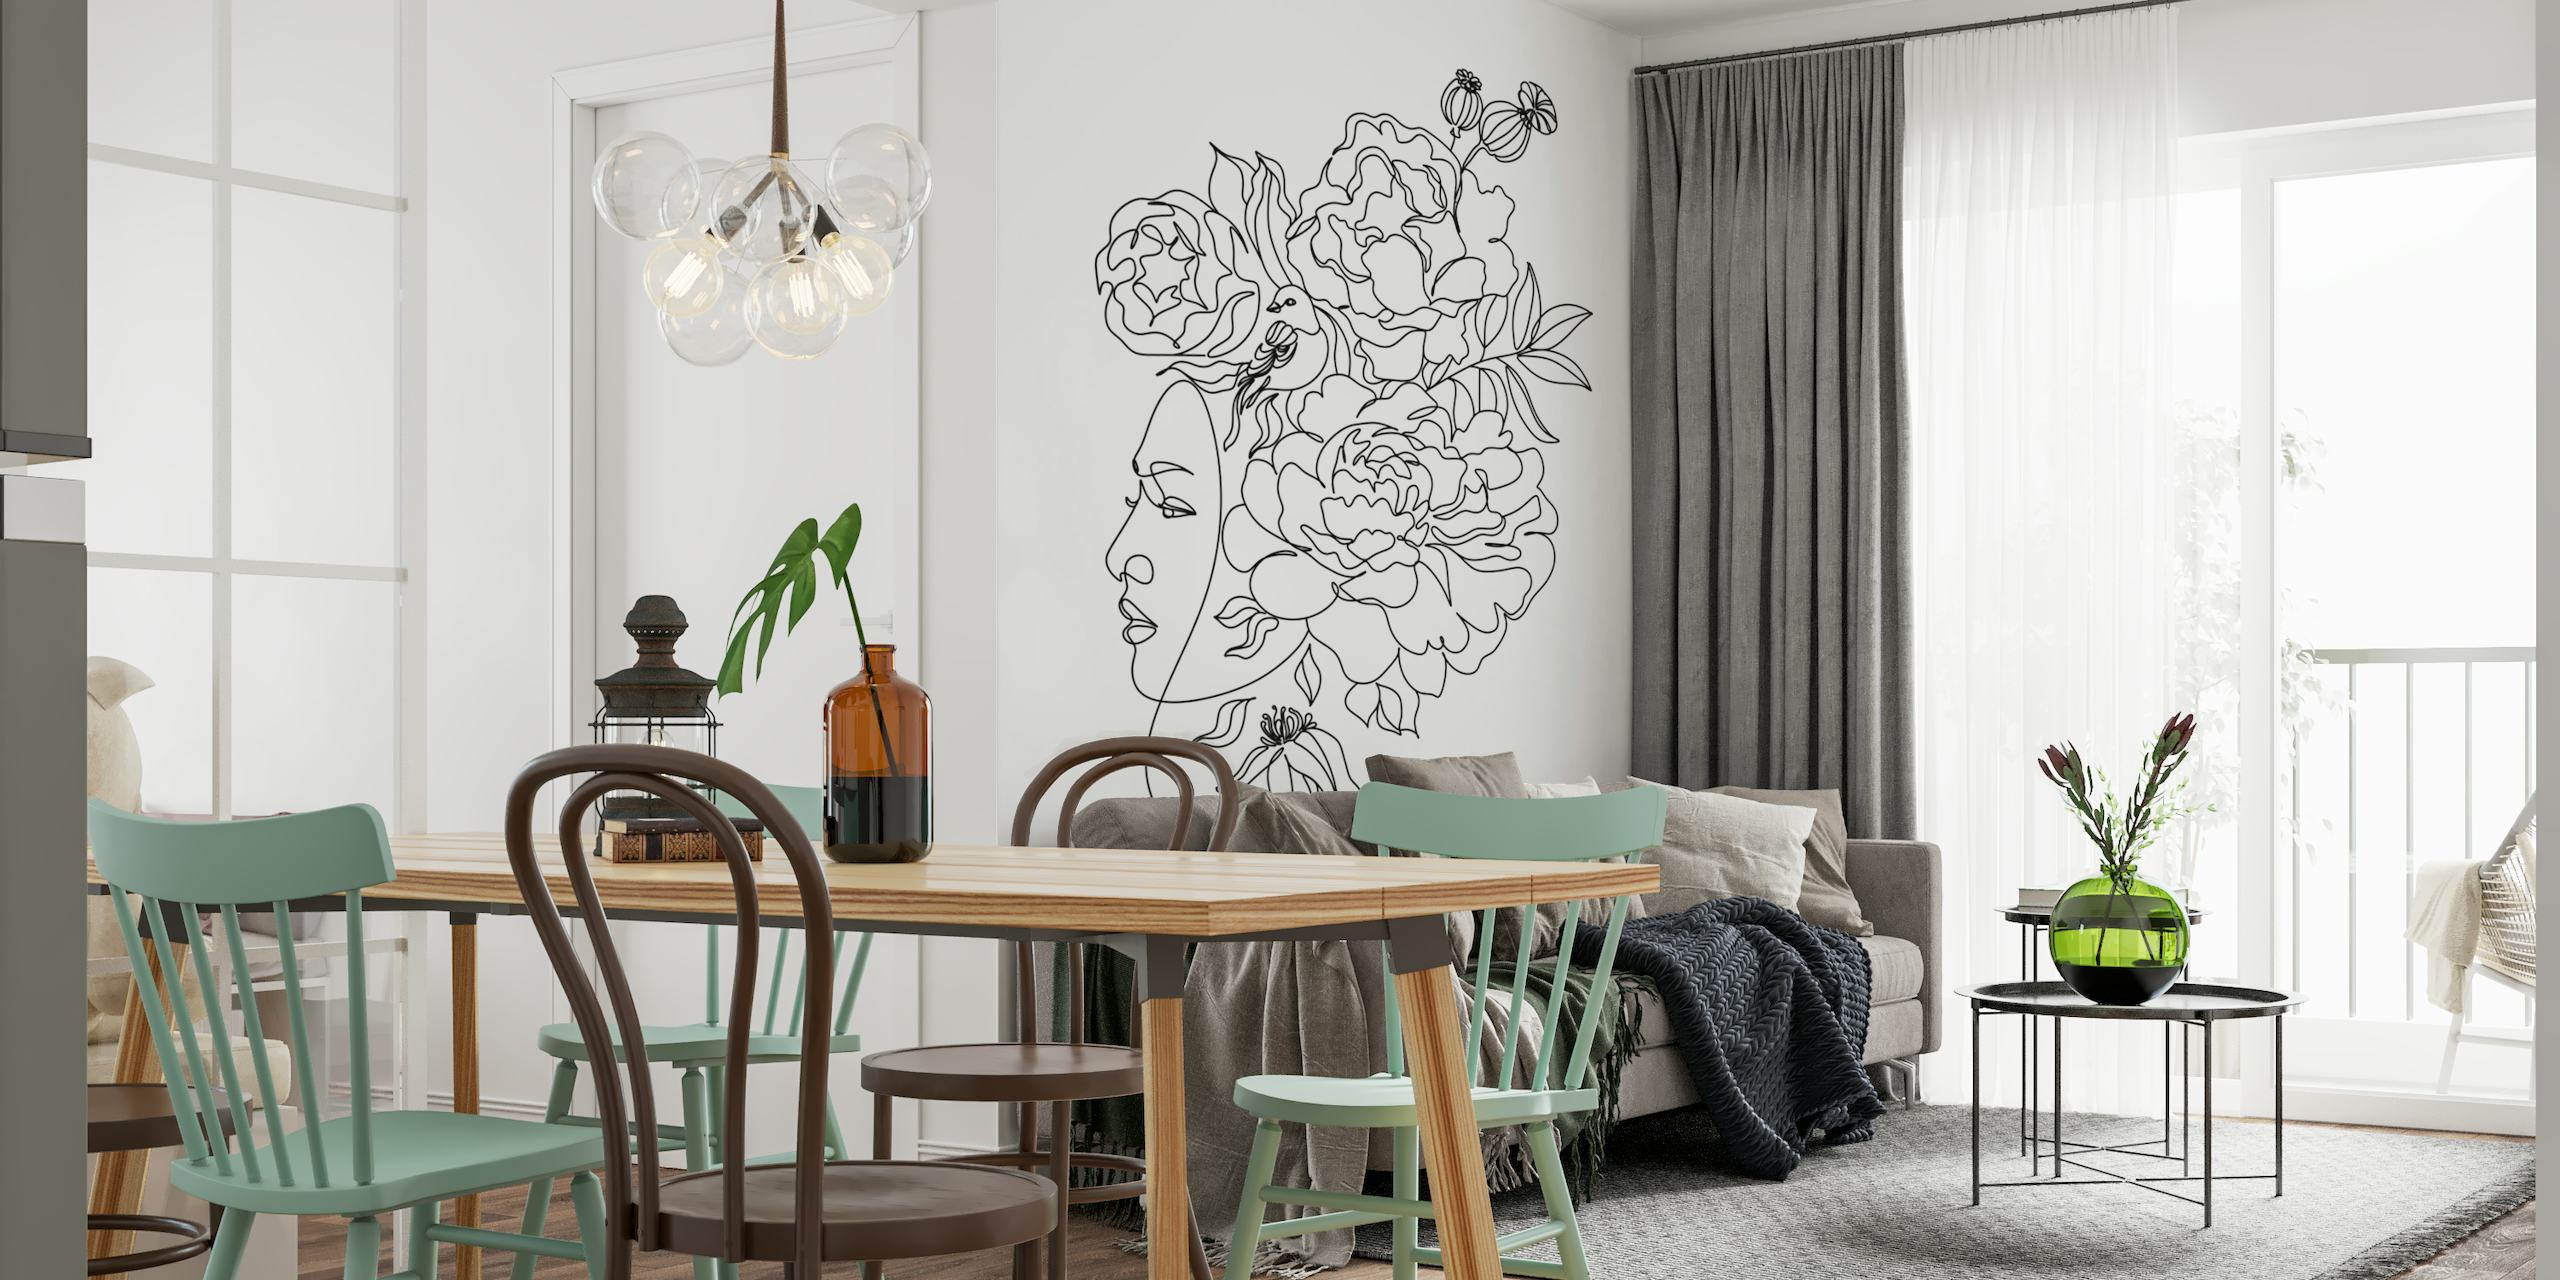 Minimalist line art wall mural of a woman's profile with intertwining flowers